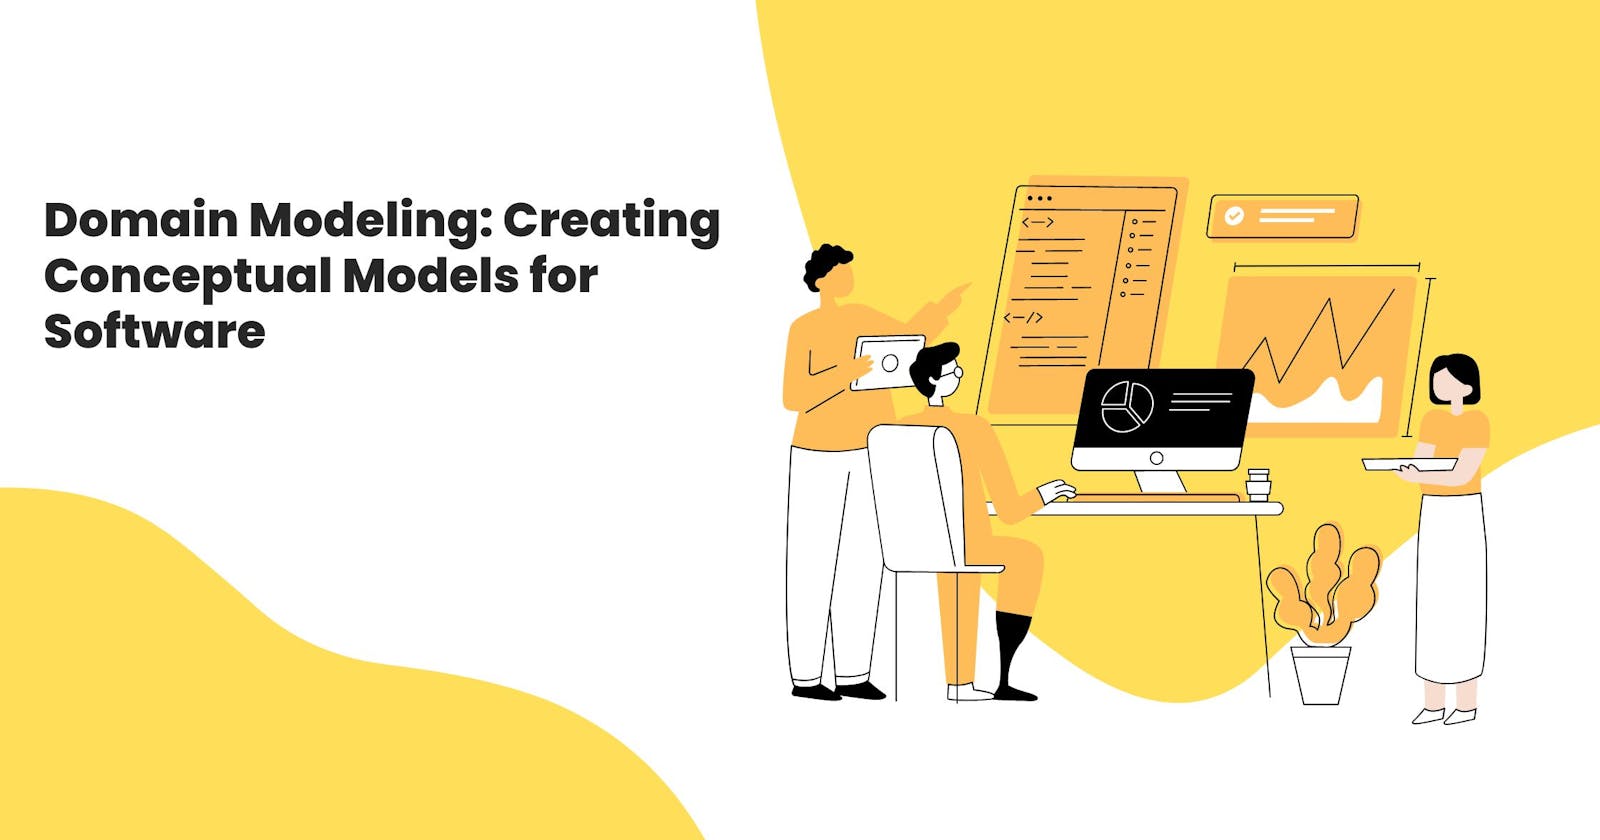 Domain Modeling: Creating Conceptual Models for Software